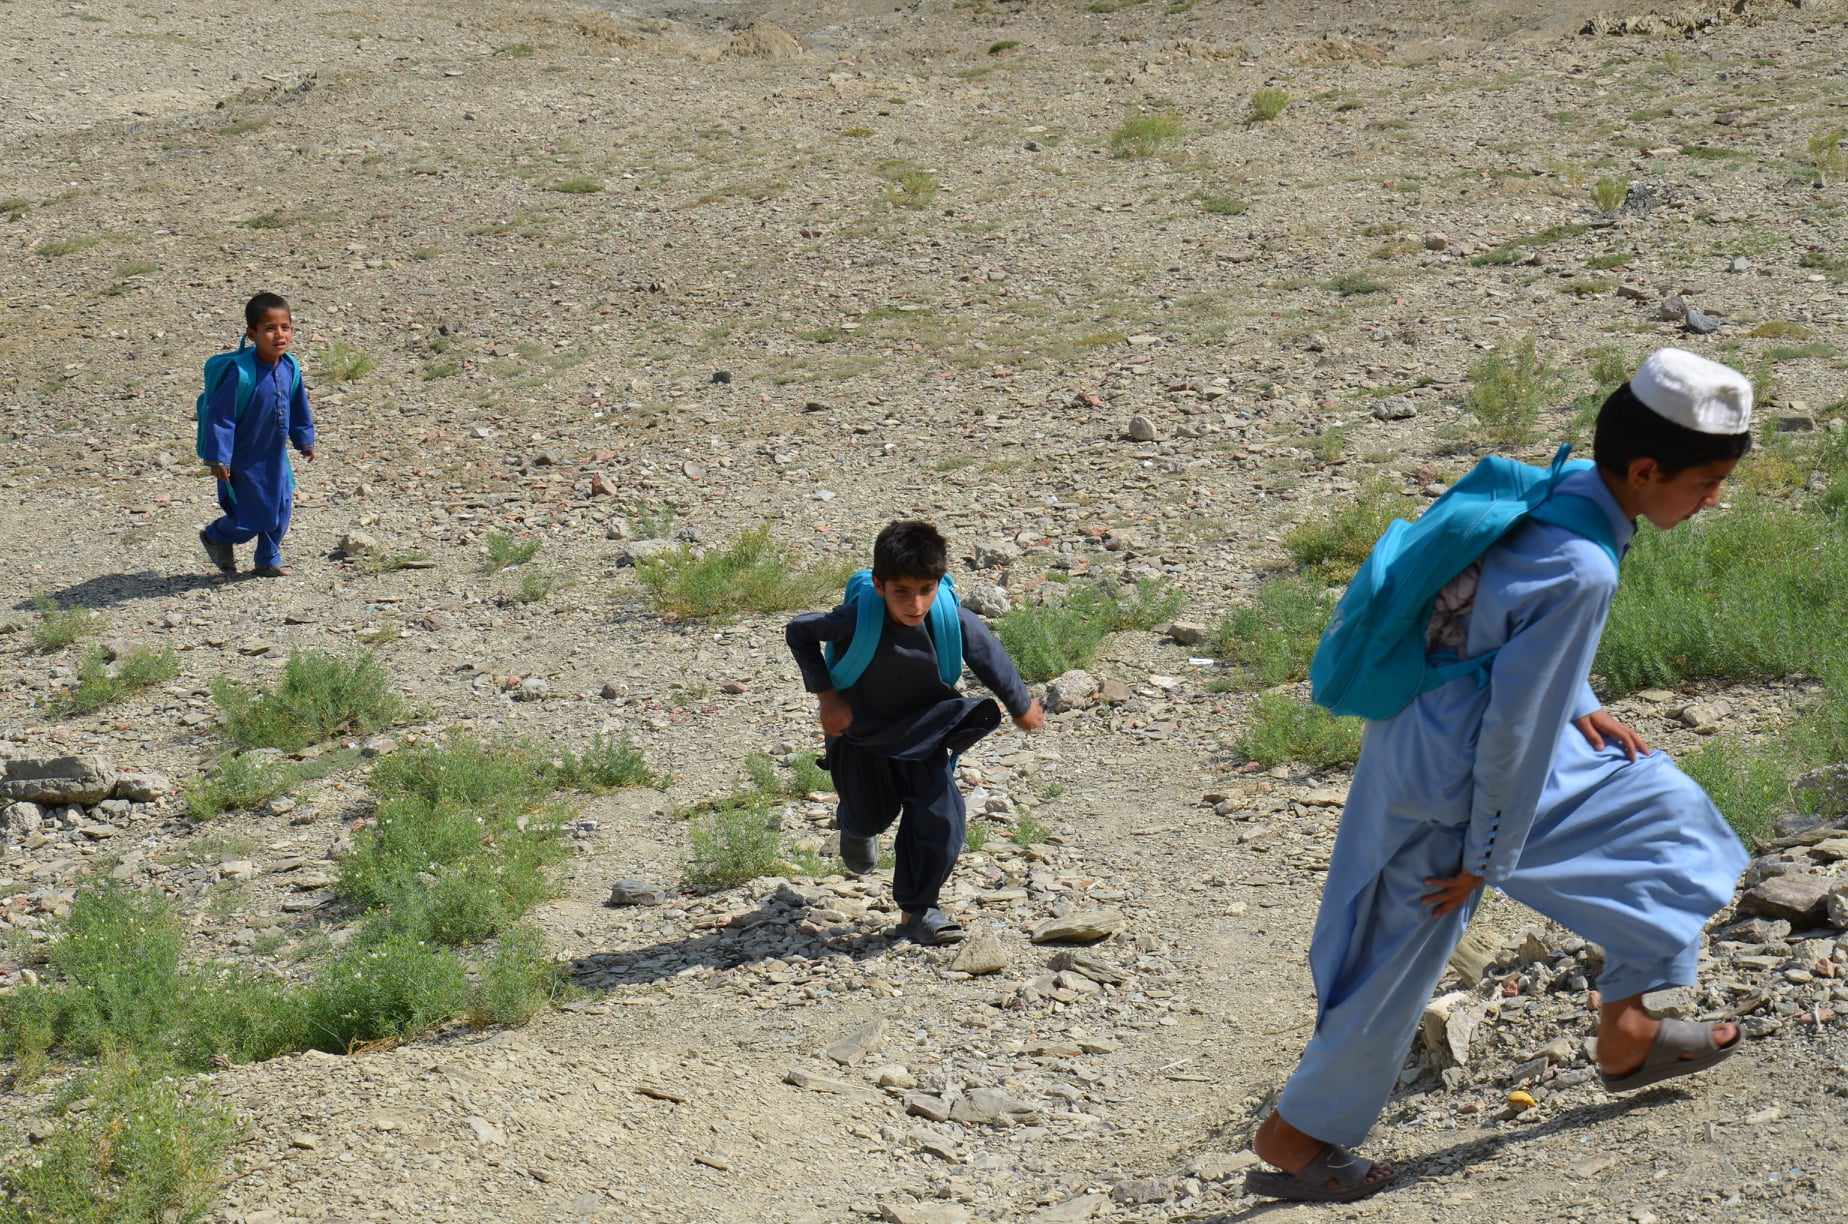 About 13,000 children lack access to schools in Khost